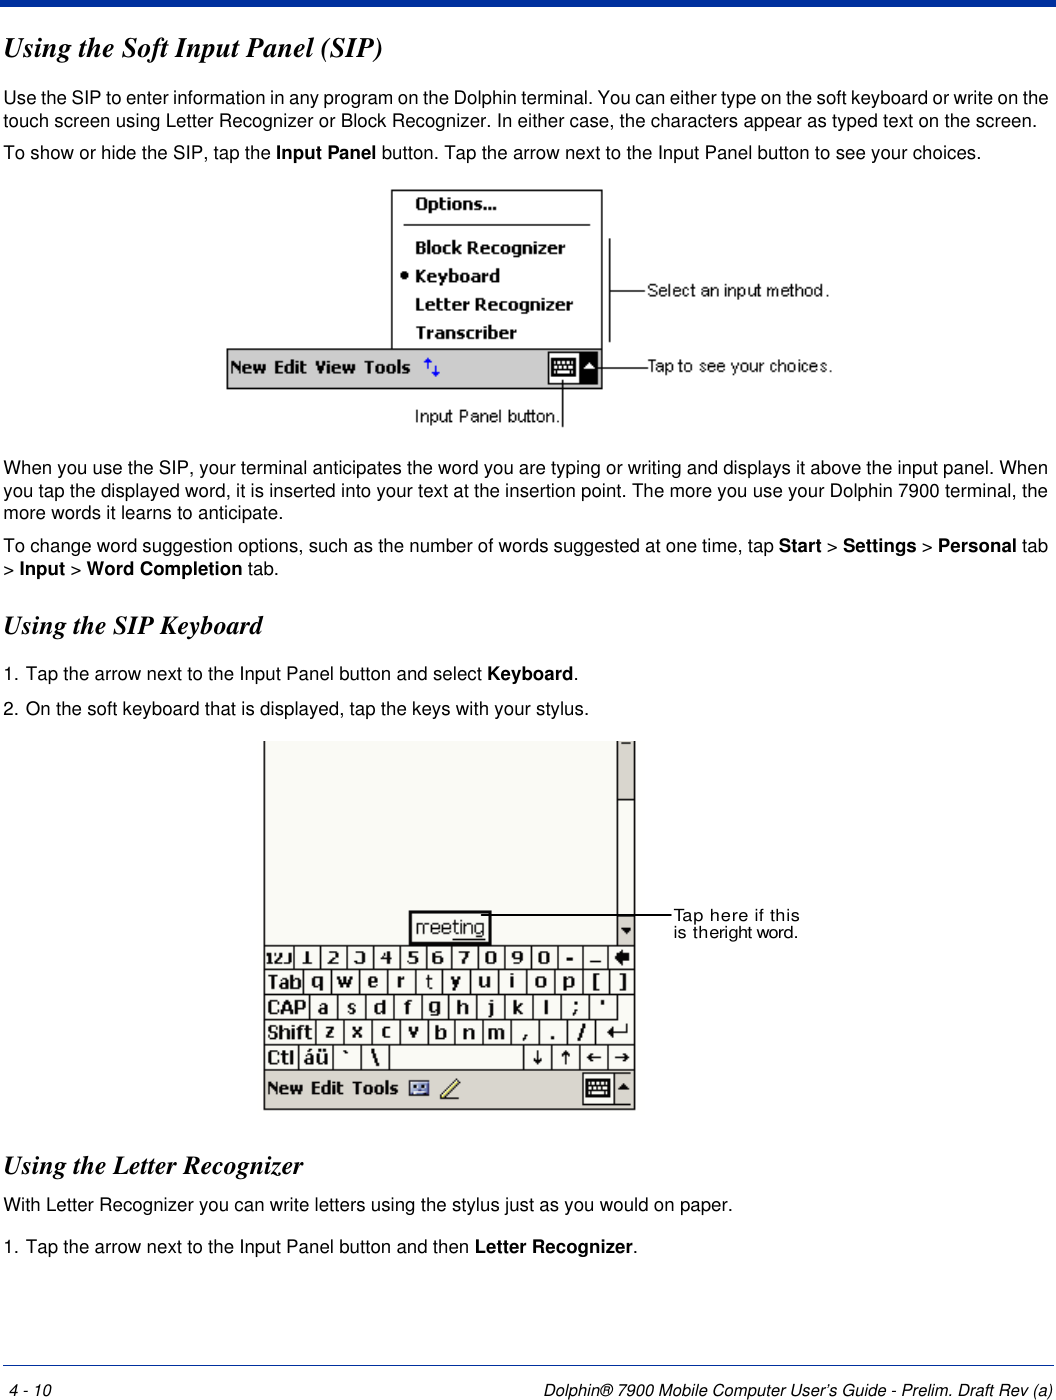 4 - 10 Dolphin® 7900 Mobile Computer User’s Guide - Prelim. Draft Rev (a)Using the Soft Input Panel (SIP)Use the SIP to enter information in any program on the Dolphin terminal. You can either type on the soft keyboard or write on the touch screen using Letter Recognizer or Block Recognizer. In either case, the characters appear as typed text on the screen. To show or hide the SIP, tap the Input Panel button. Tap the arrow next to the Input Panel button to see your choices.When you use the SIP, your terminal anticipates the word you are typing or writing and displays it above the input panel. When you tap the displayed word, it is inserted into your text at the insertion point. The more you use your Dolphin 7900 terminal, the more words it learns to anticipate.To change word suggestion options, such as the number of words suggested at one time, tap Start &gt; Settings &gt; Personal tab &gt; Input &gt; Word Completion tab.Using the SIP Keyboard1. Tap the arrow next to the Input Panel button and select Keyboard.2. On the soft keyboard that is displayed, tap the keys with your stylus.Using the Letter RecognizerWith Letter Recognizer you can write letters using the stylus just as you would on paper.1. Tap the arrow next to the Input Panel button and then Letter Recognizer.Tap here if thisis theright word.